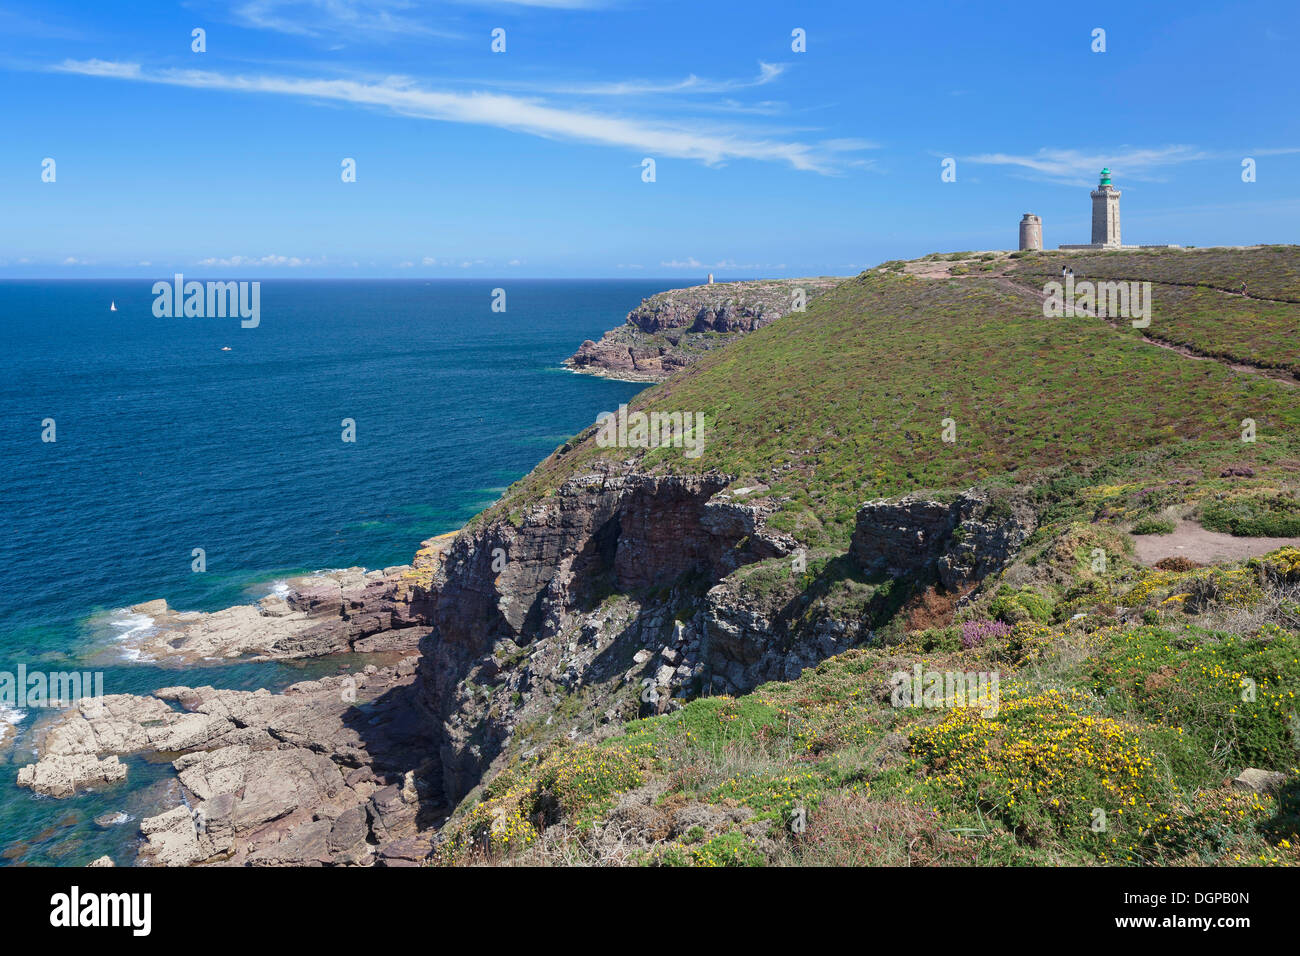 Coastal cliffs of Cap Frehel with the old and new lighthouses, Cap Frehel, Brittany, France Stock Photo